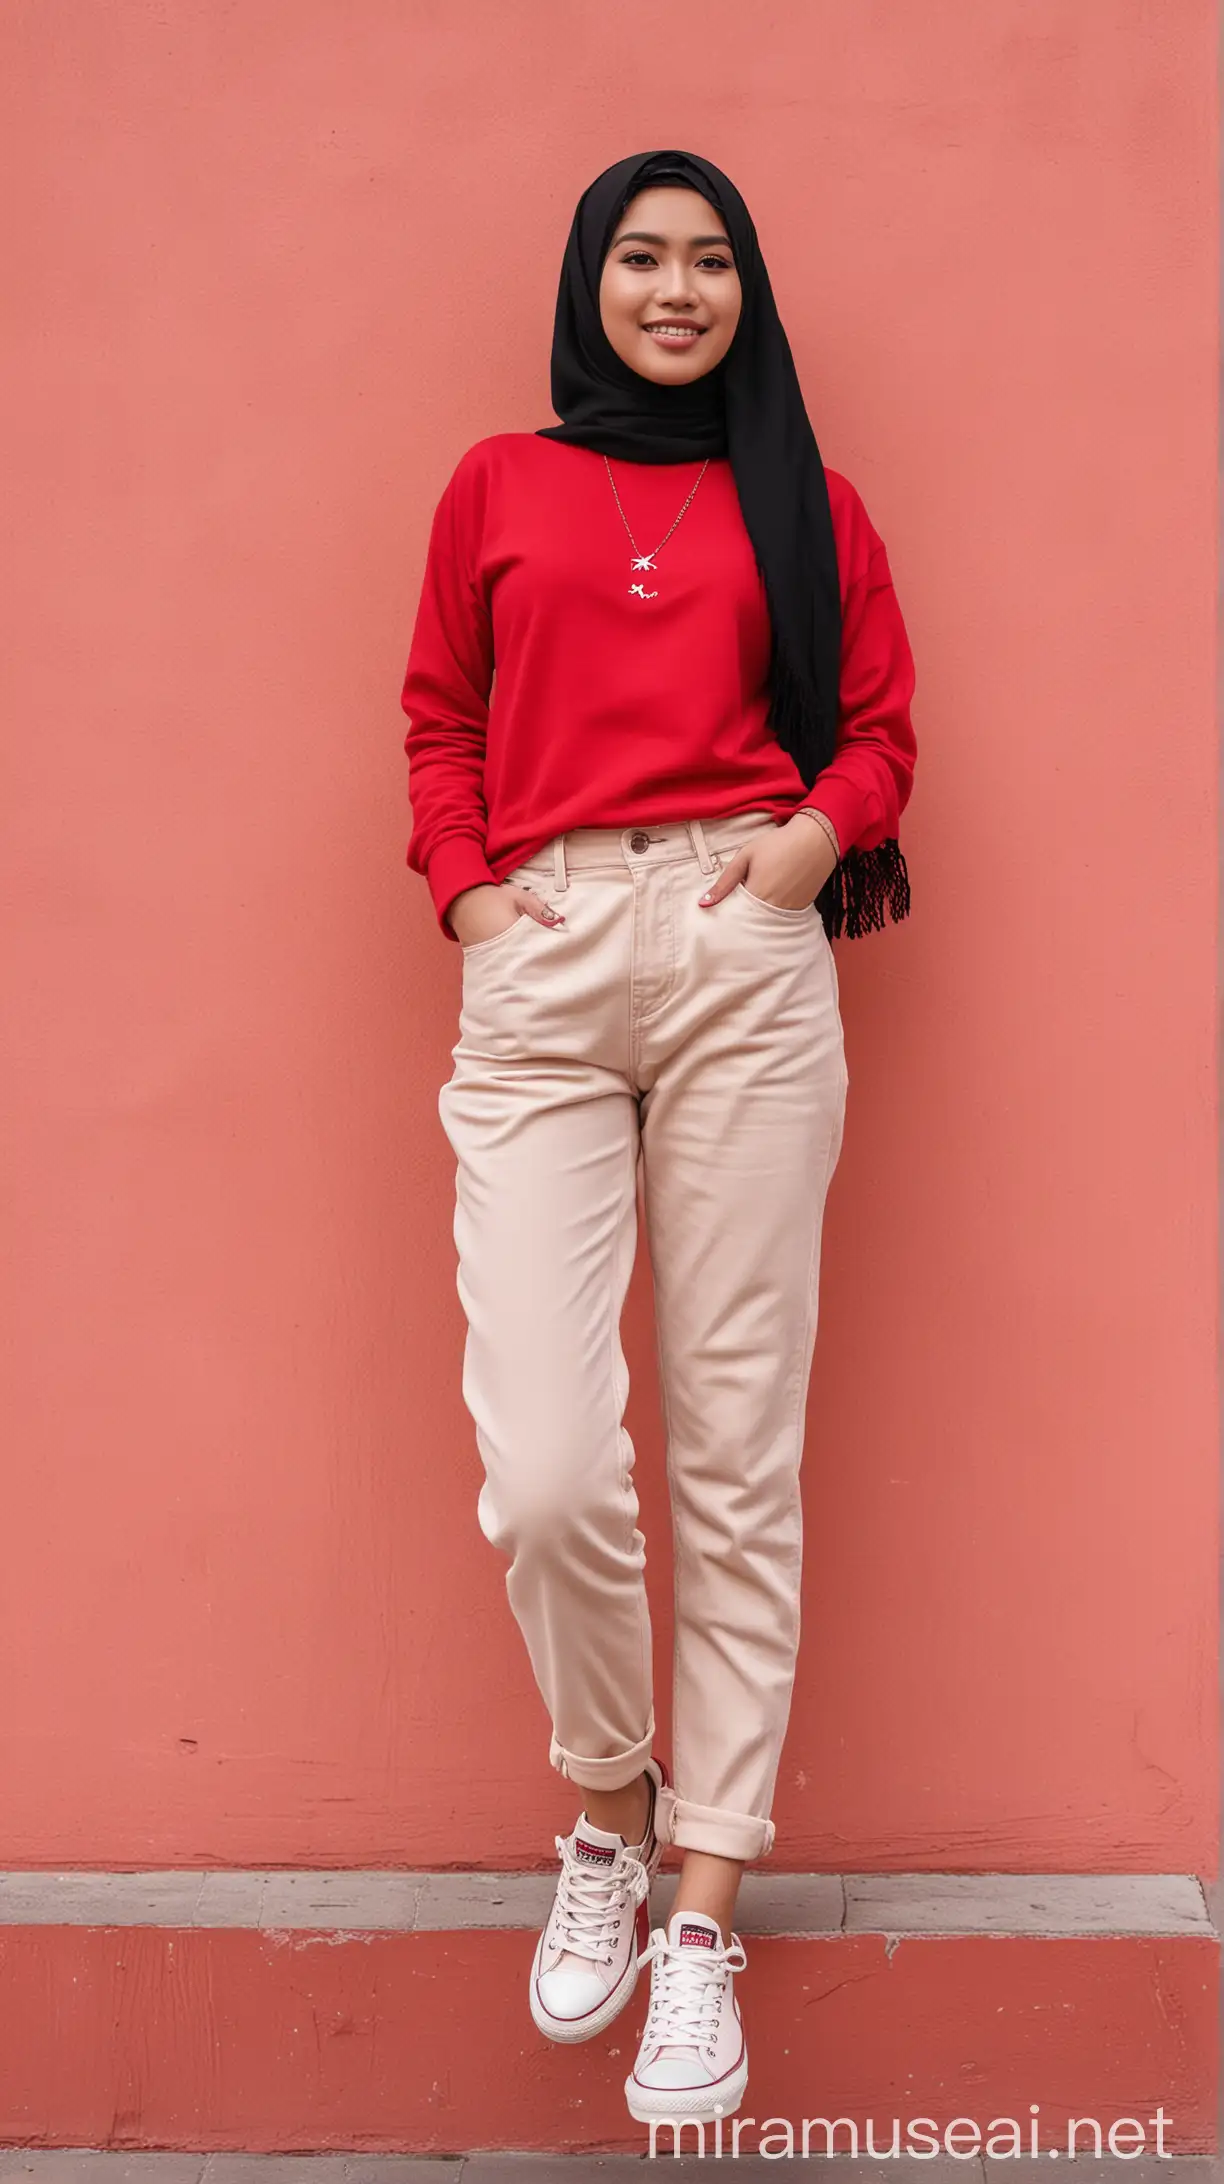 photo of an Indonesian woman, wearing a black hijab, very beautiful, wearing a red sweater, cream jeans, Converse pink shoes,red wall background, photo taken by S24 ultra camera, UHD